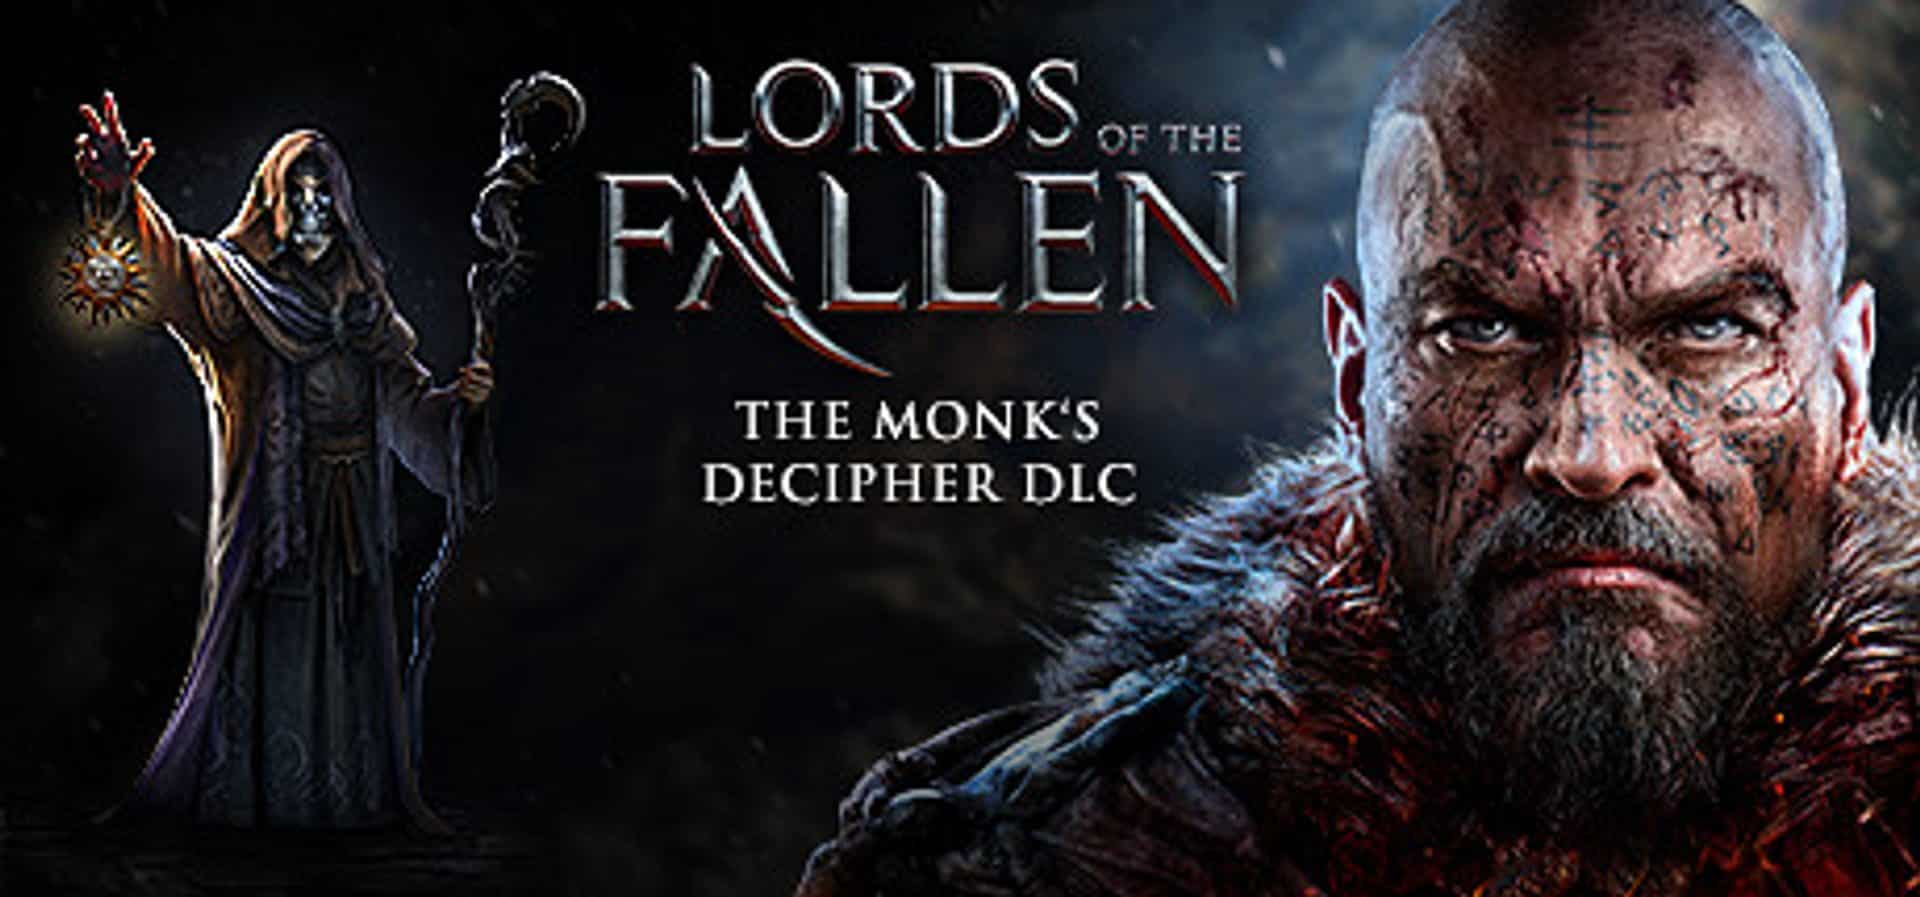 Lords of the Fallen: The Monk's Decipher